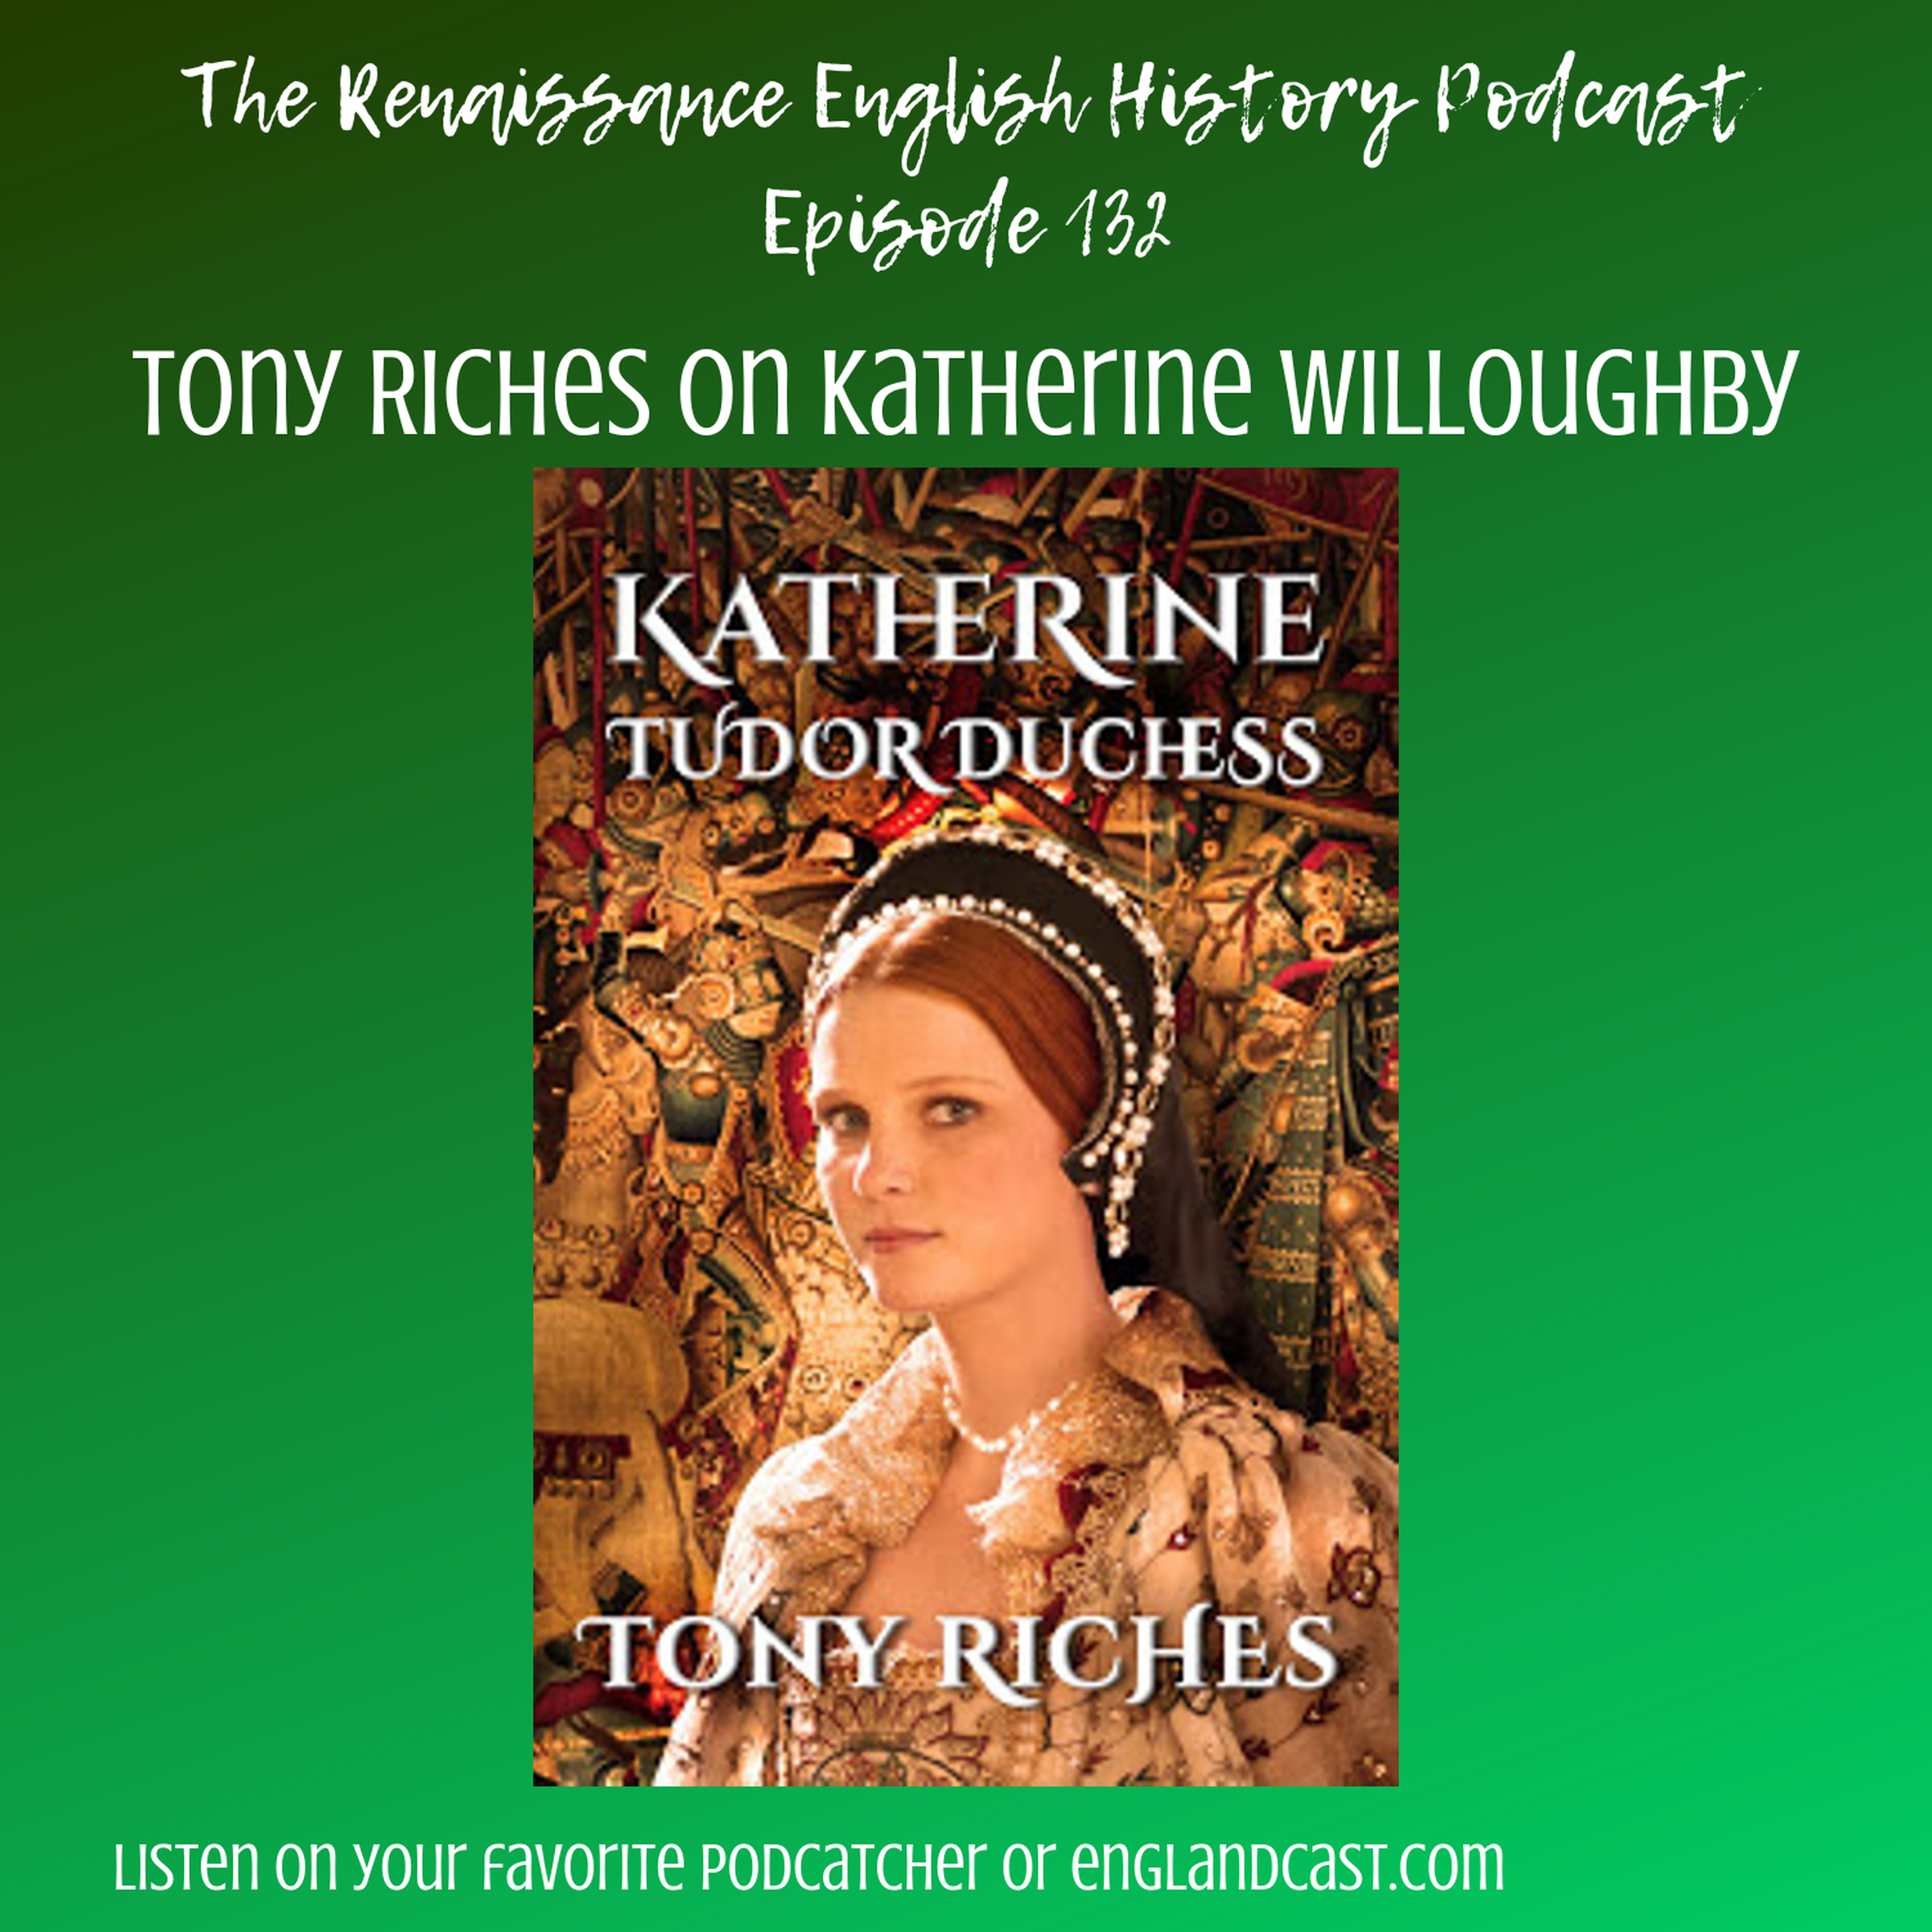 Episode 132: Tony Riches on Katherine Willoughby